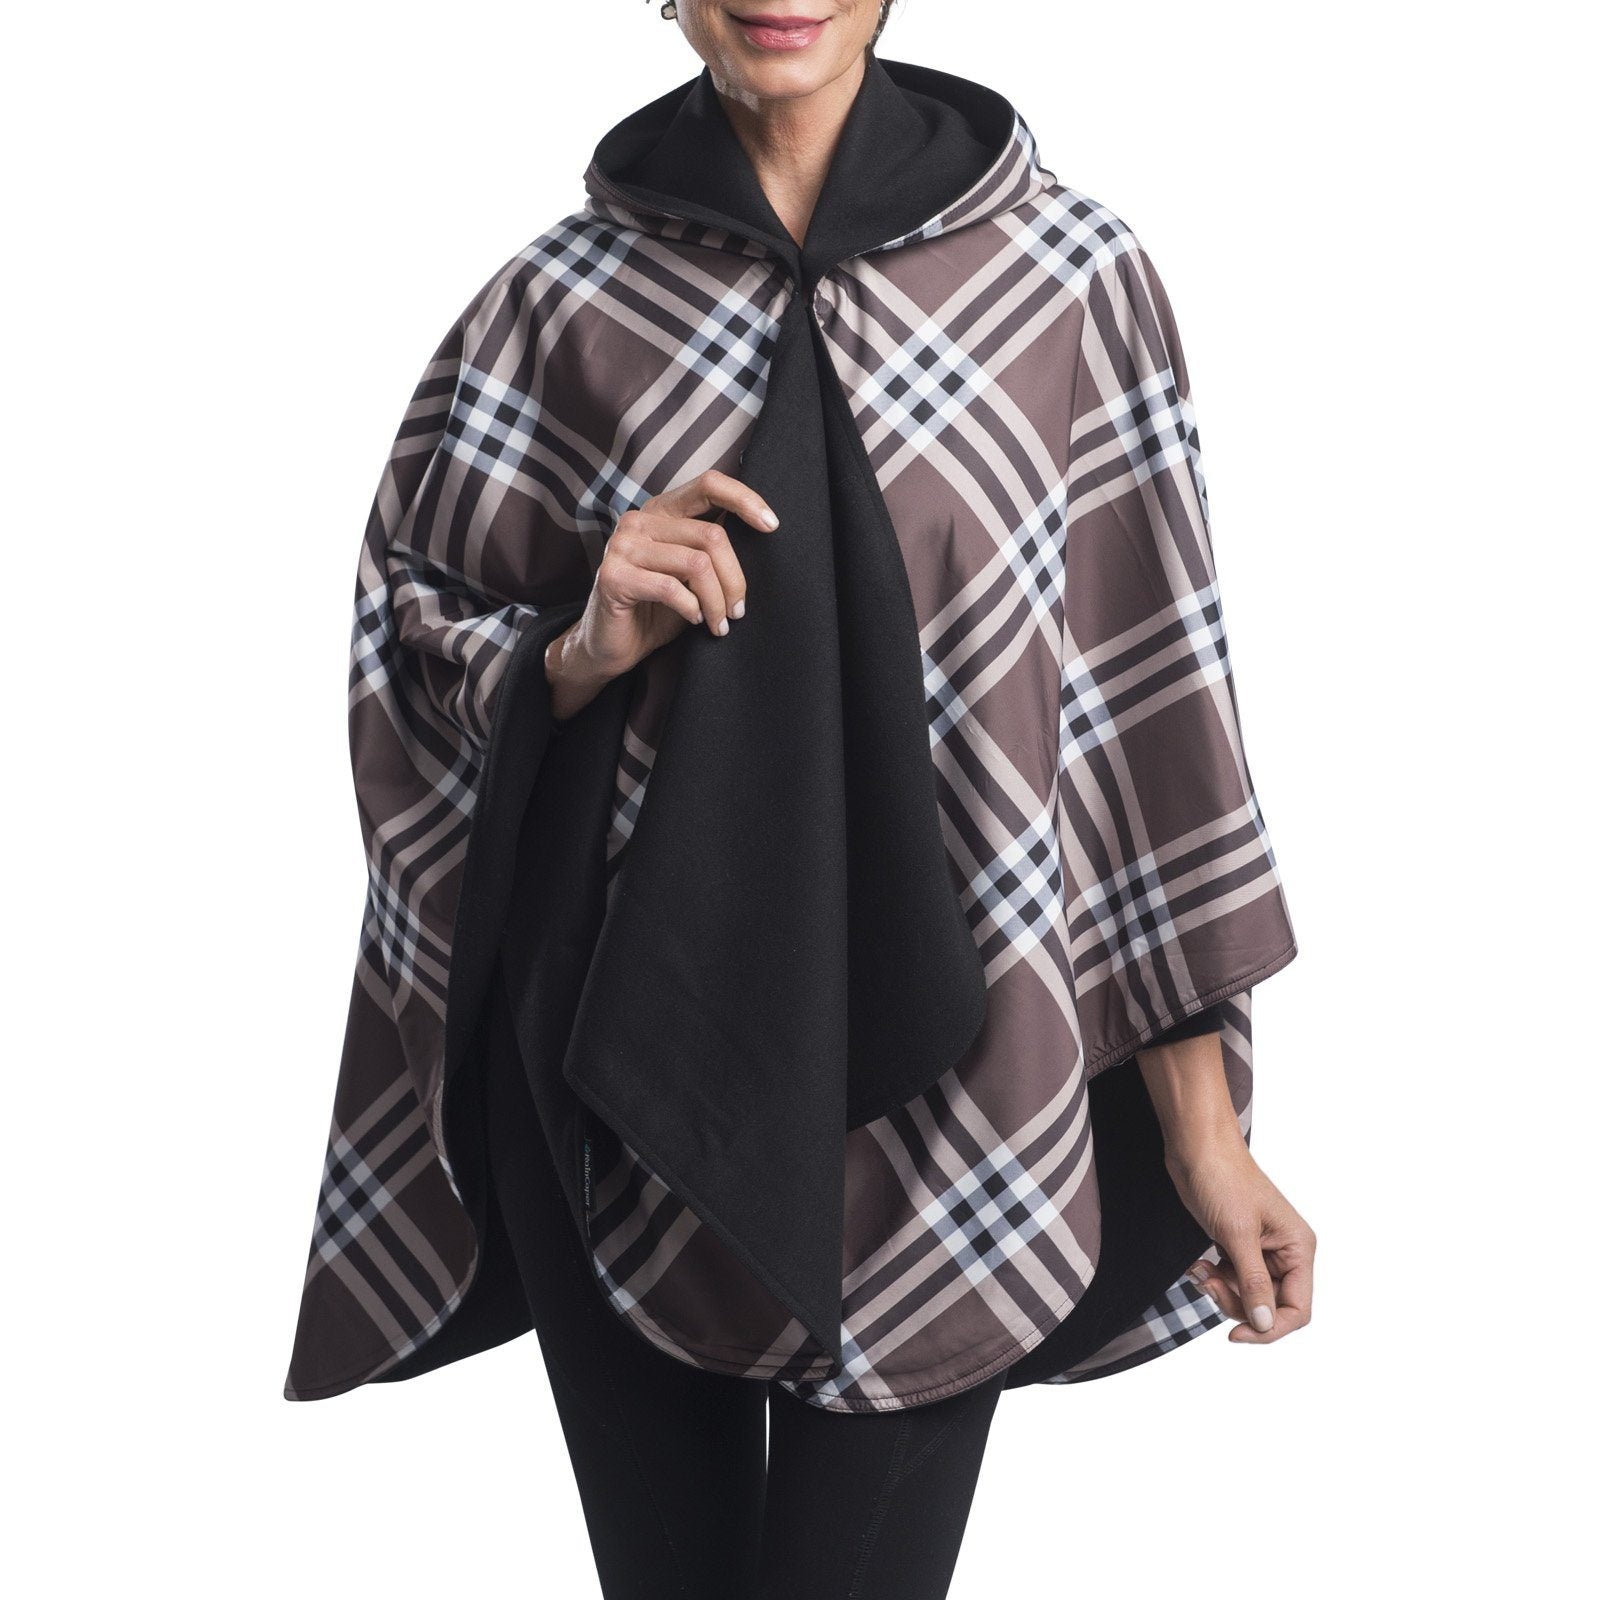 Woman wearing a WarmCaper Rainproof Black & Coco Plaid rain and travel cape. The reversible cape is warm black; the Rainproof Coco Plaid print is visible on the hood and lapels